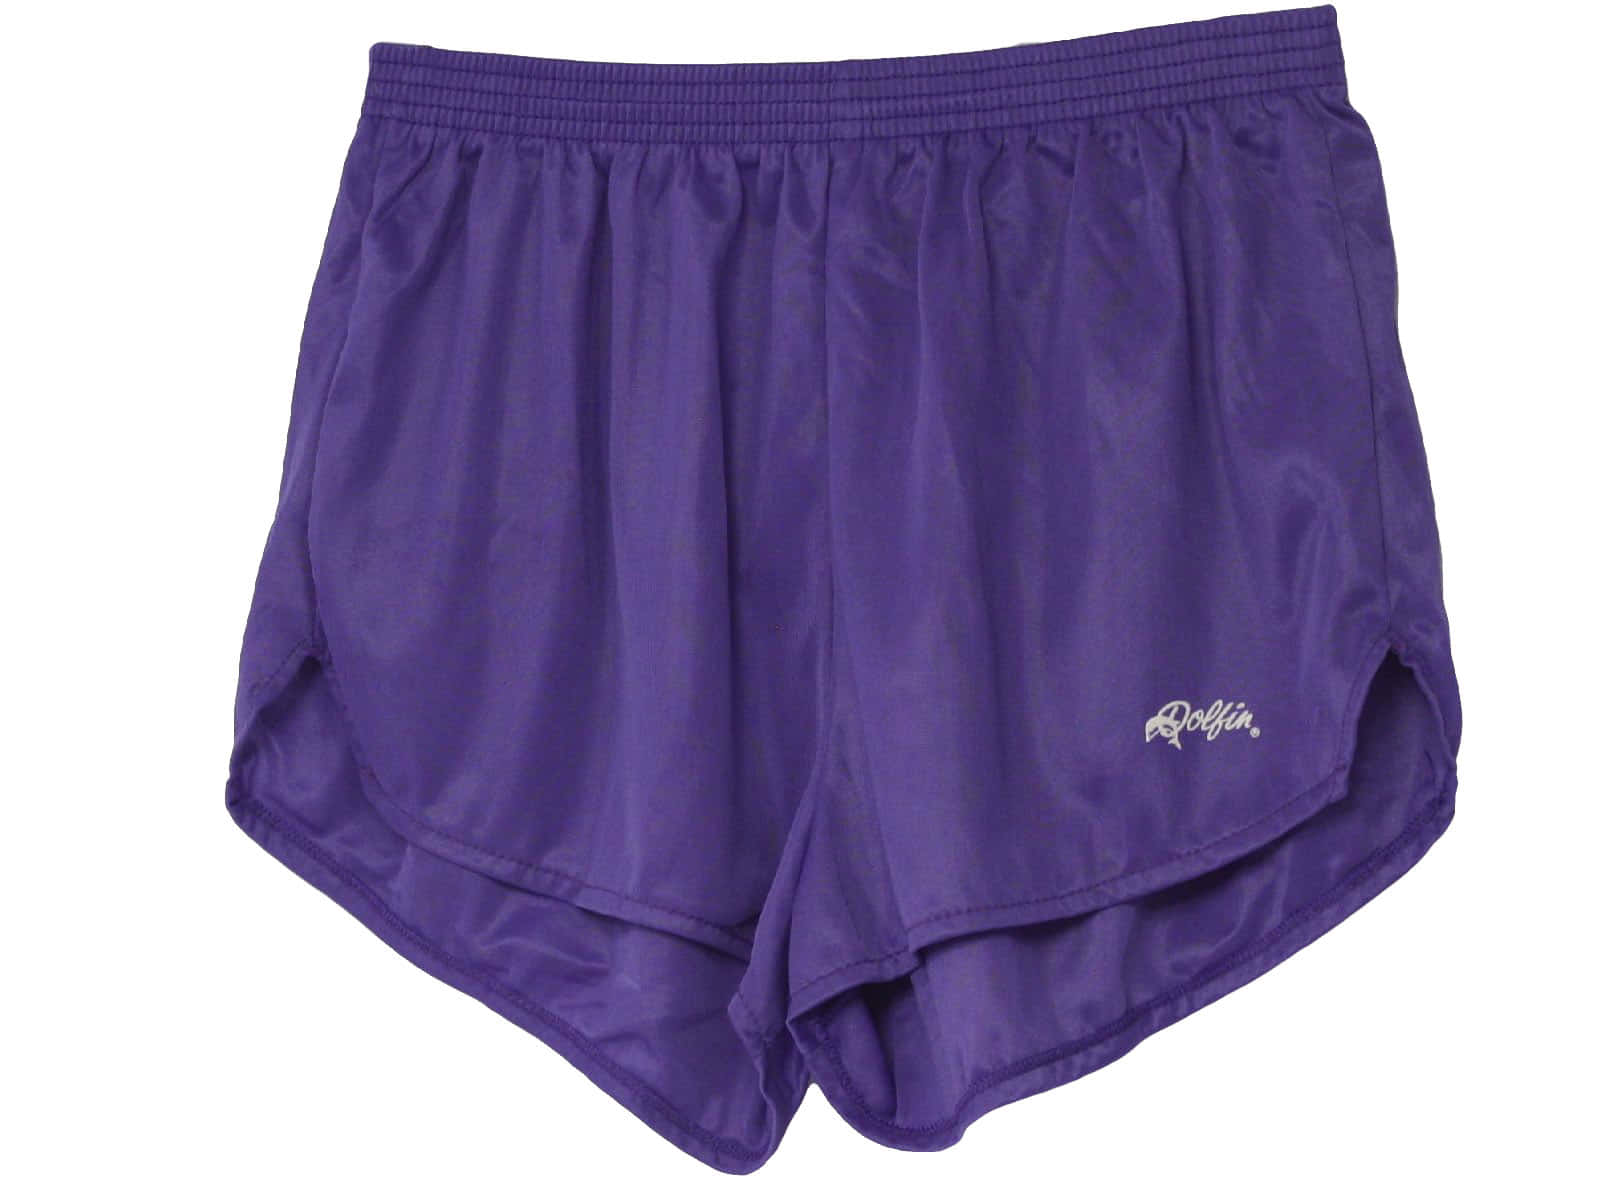 "Brighten Up Your Summer Look With Purple Shorts" Wallpaper